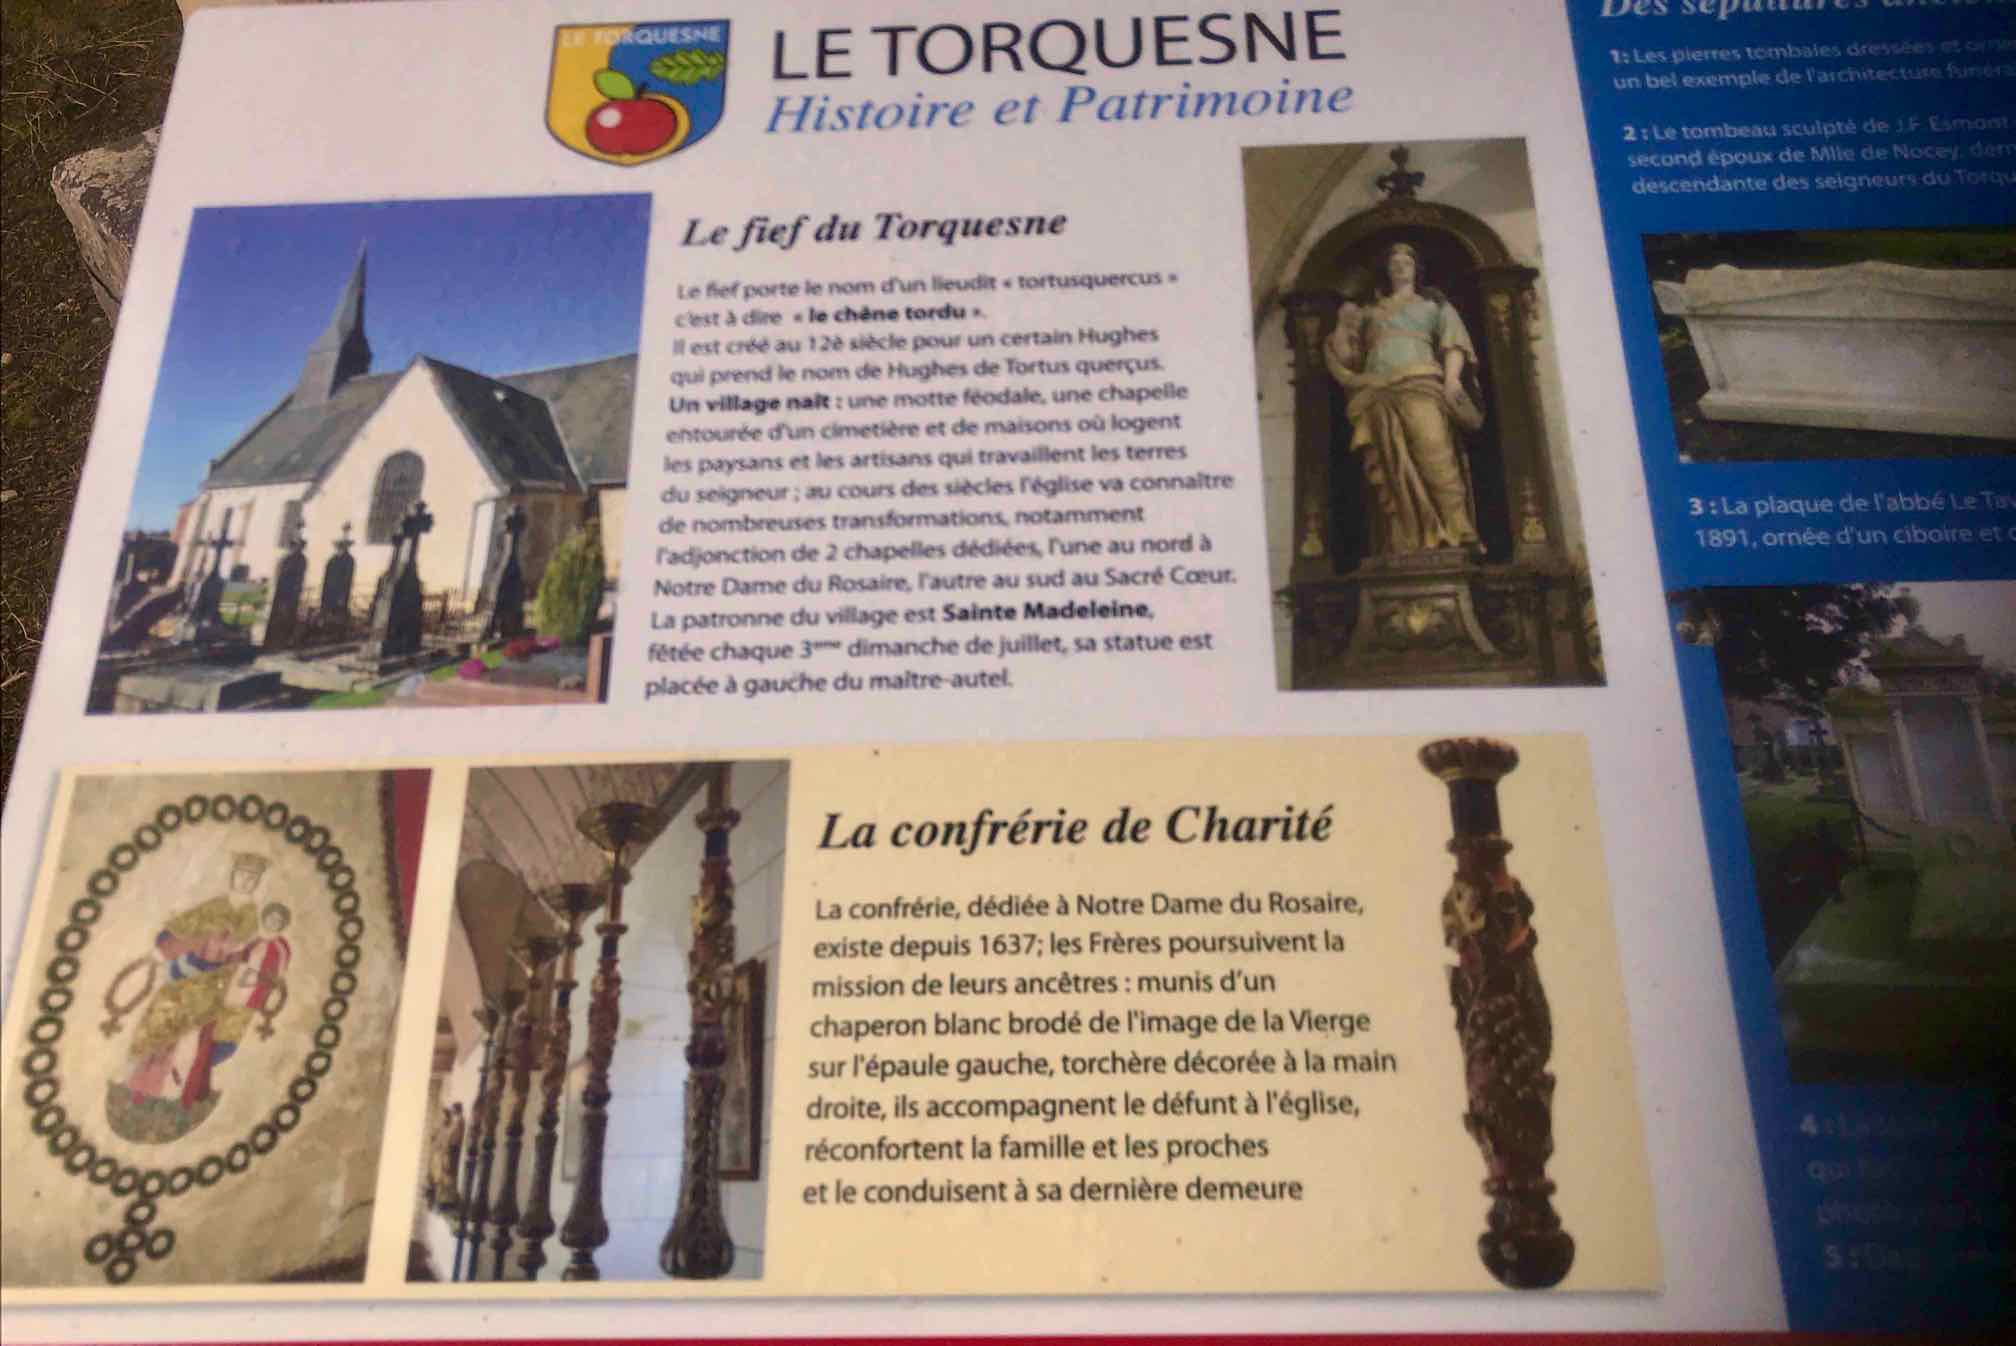  Information brochure for the church at Le Torquesne